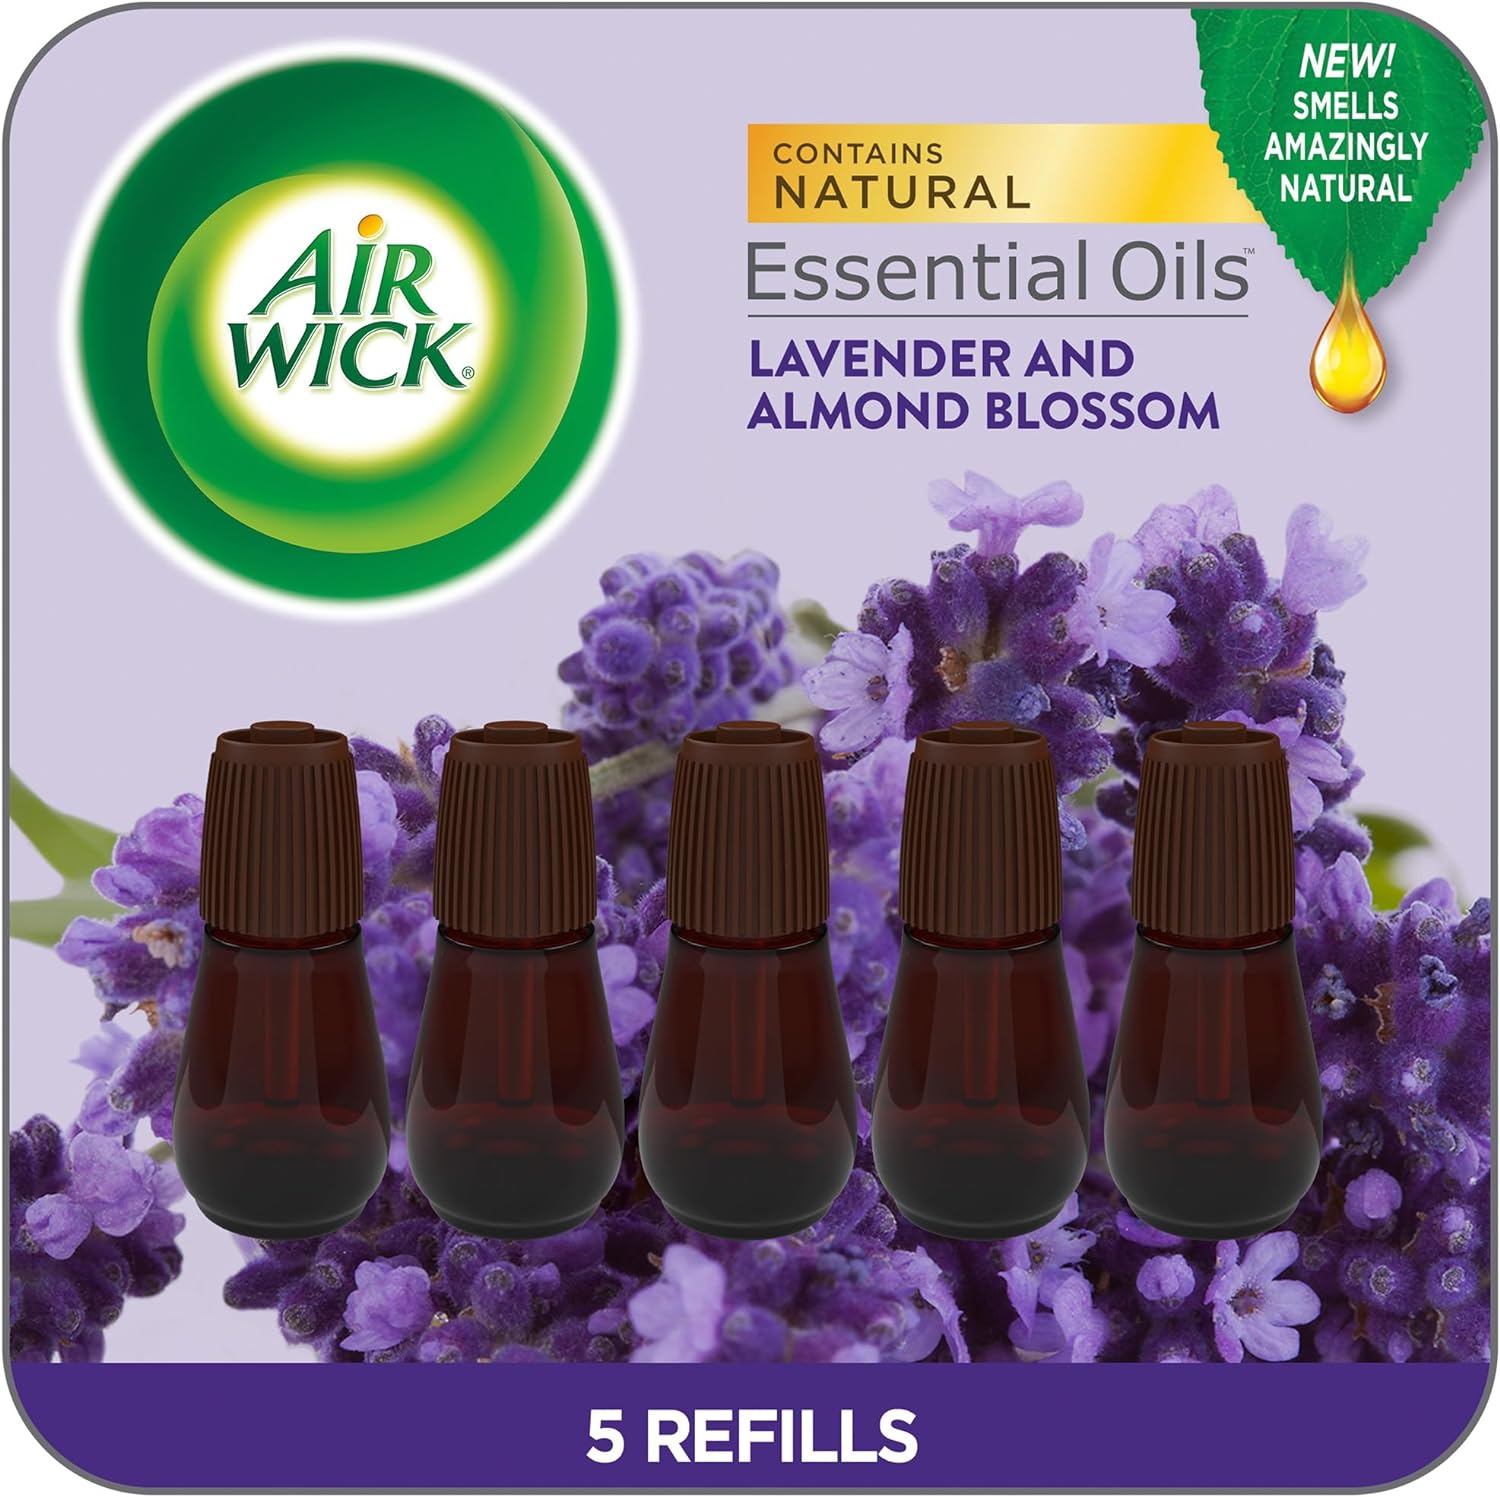 Air Wick Essential Mist Refill, 5 ct, Lavender and Almond Blossom, Essential Oils Diffuser, Air Freshener